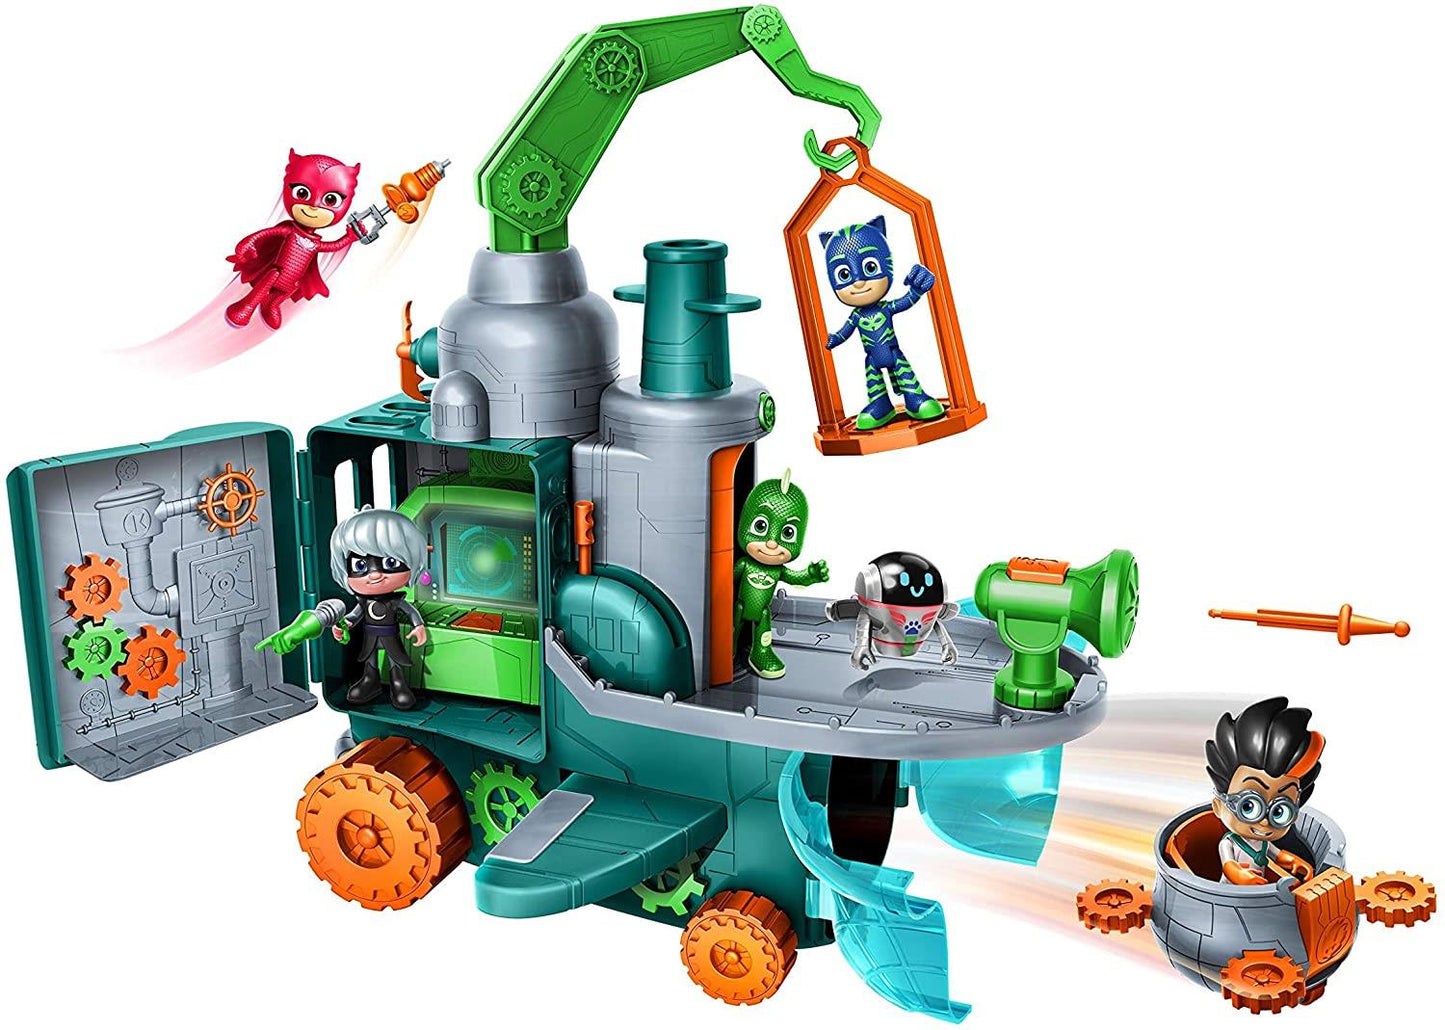 PJ Masks Romeo's Flying Factory Playset 95780 Save the Sky Toy